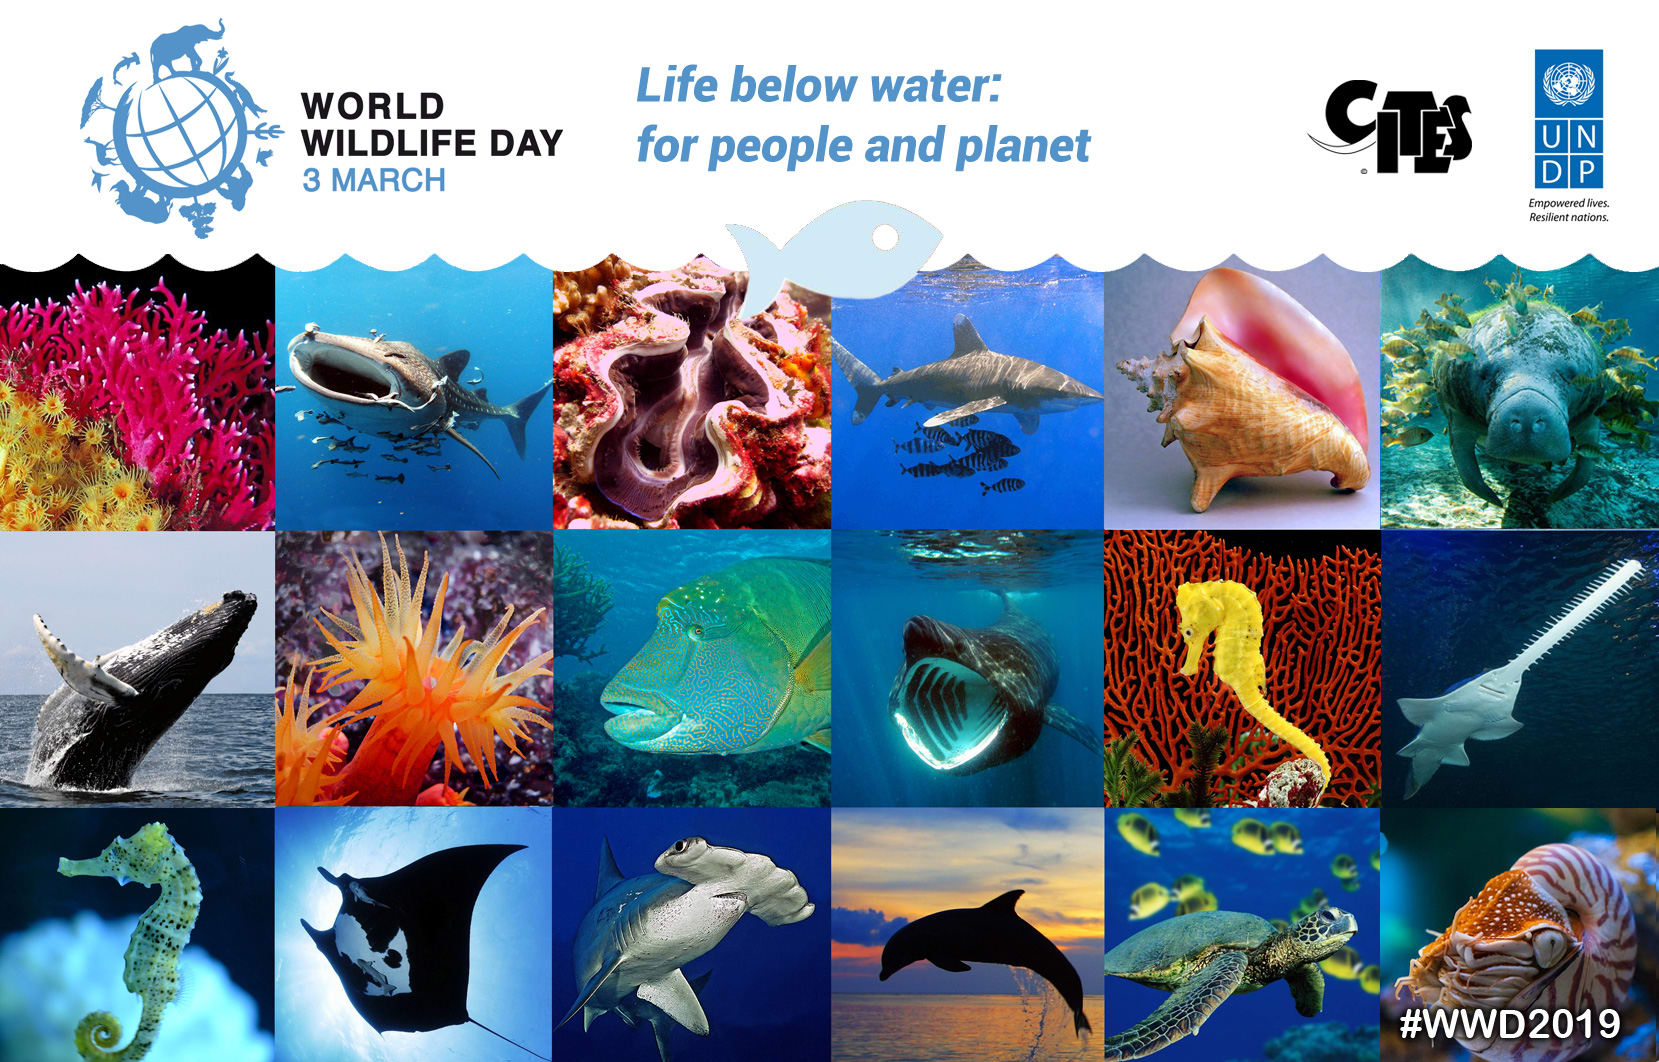 “Life below water: for people and planet” - from OX Magazine